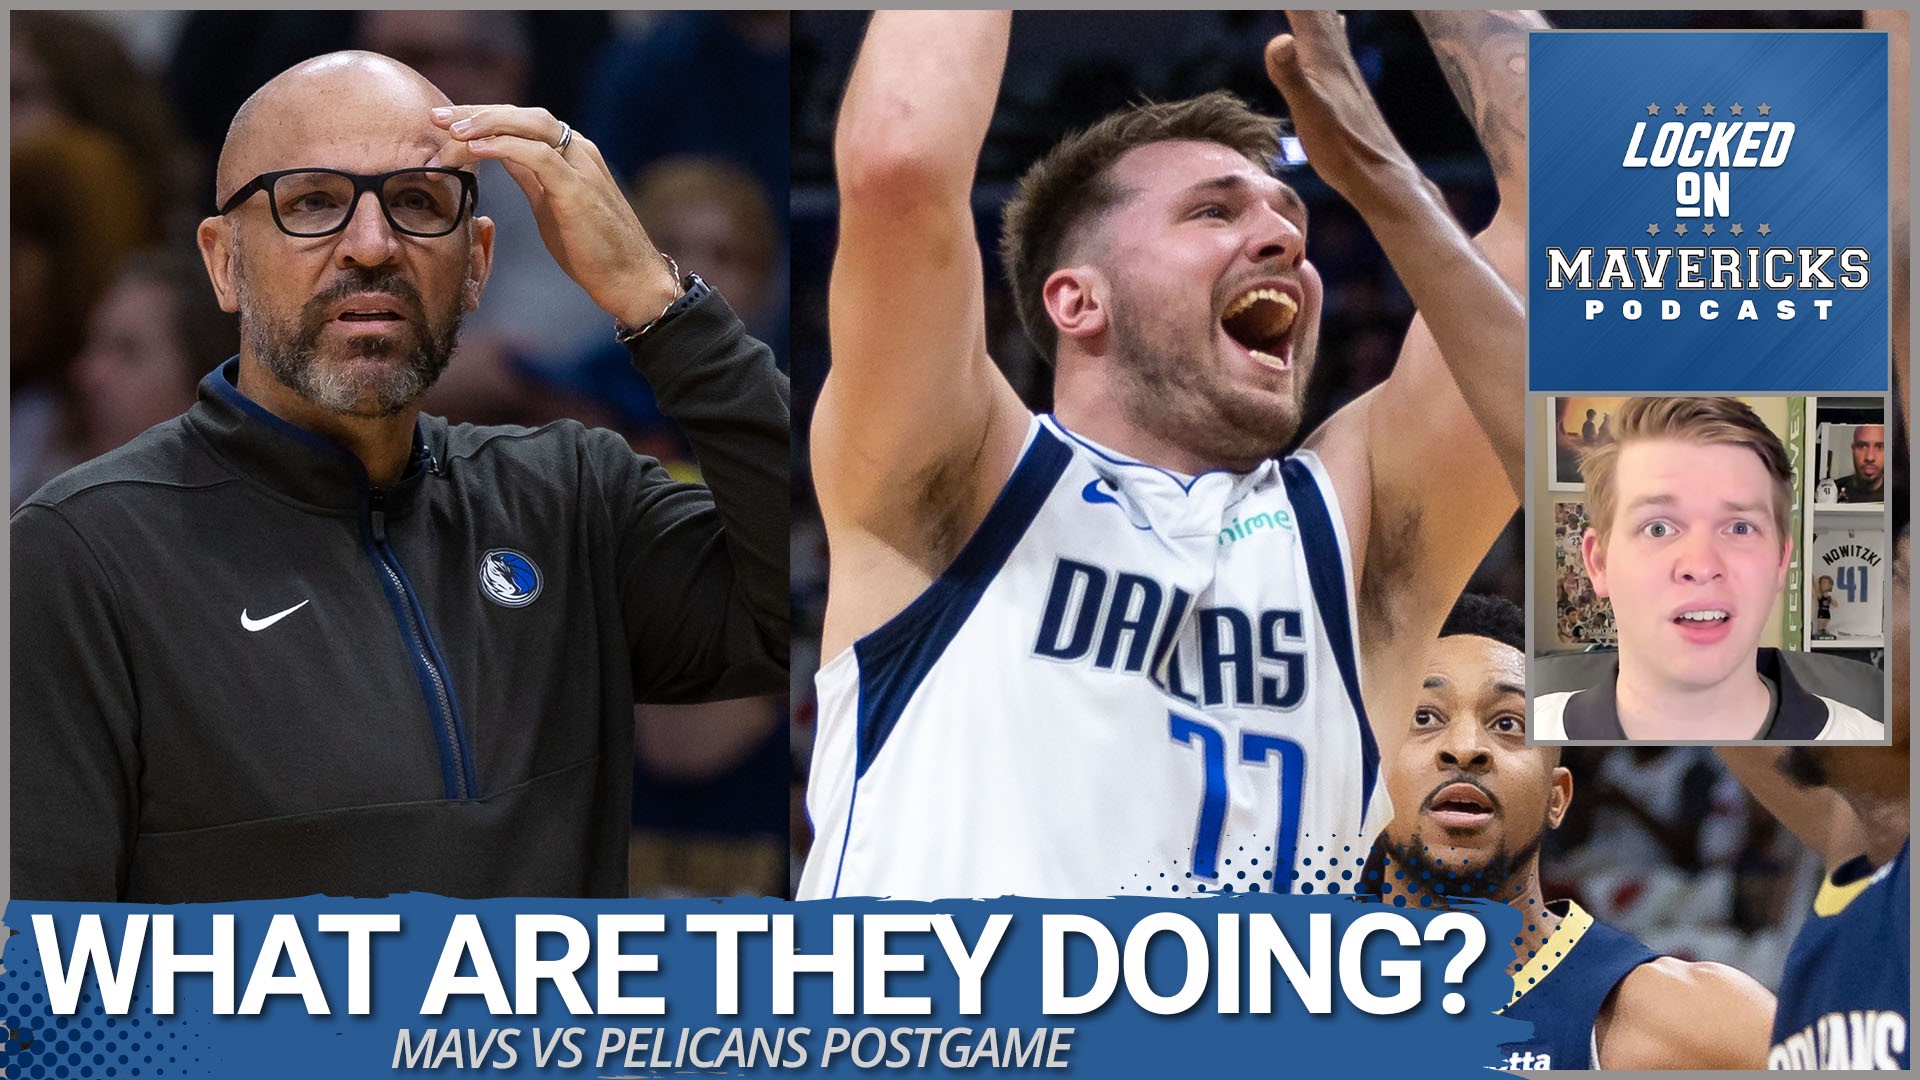 Nick Angstadt breaks down the Mavs biggest issues and why they were so fully exposed in this loss to the Pelicans.